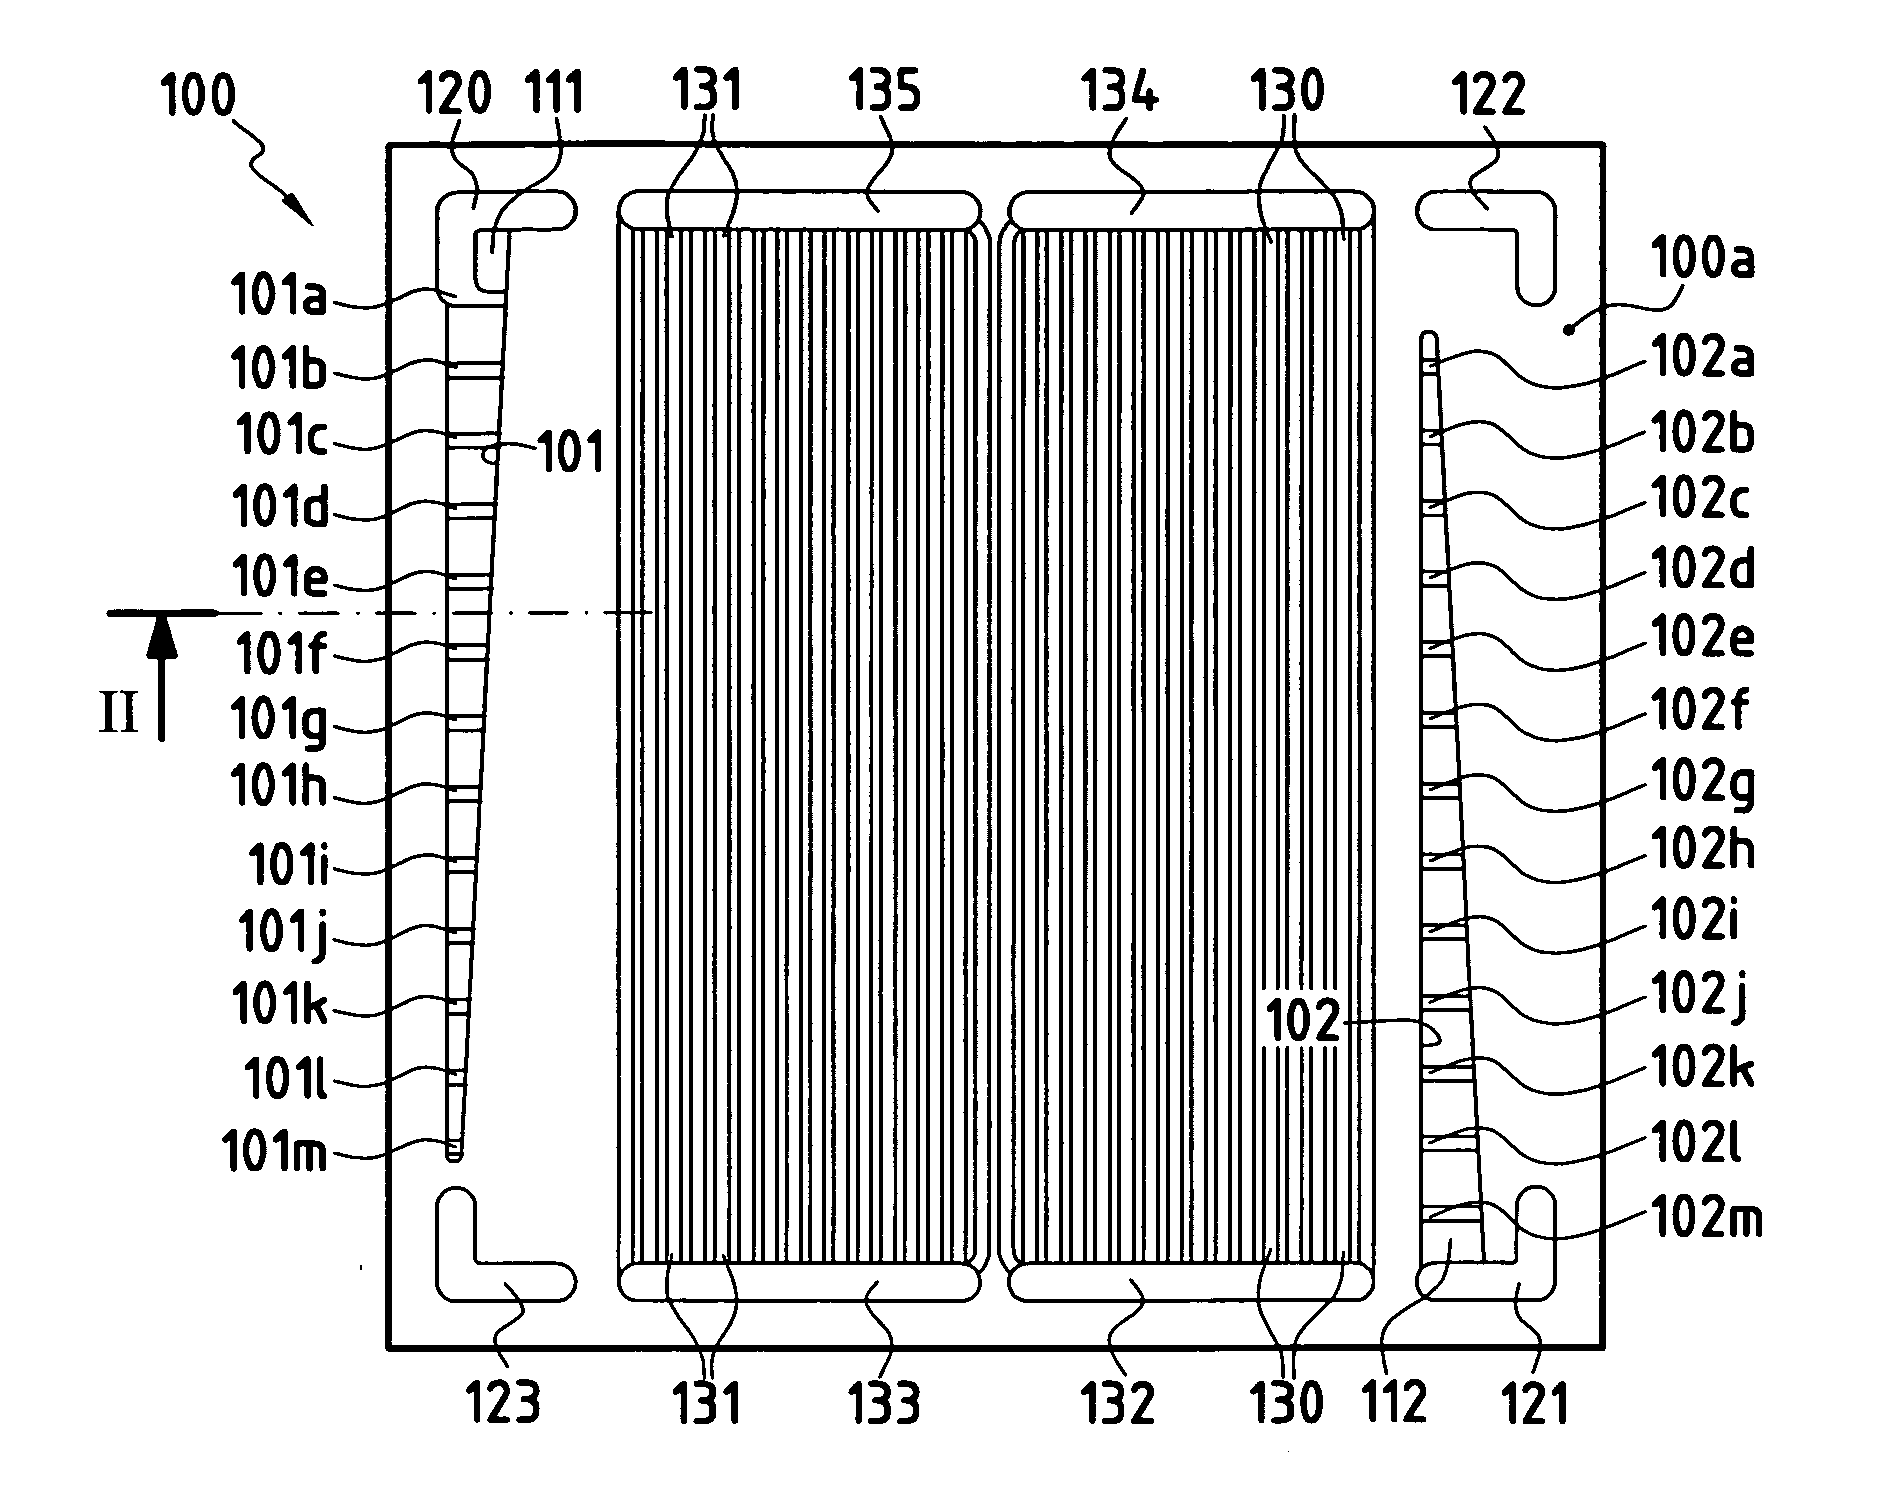 Bipolar plate for a fuel cell